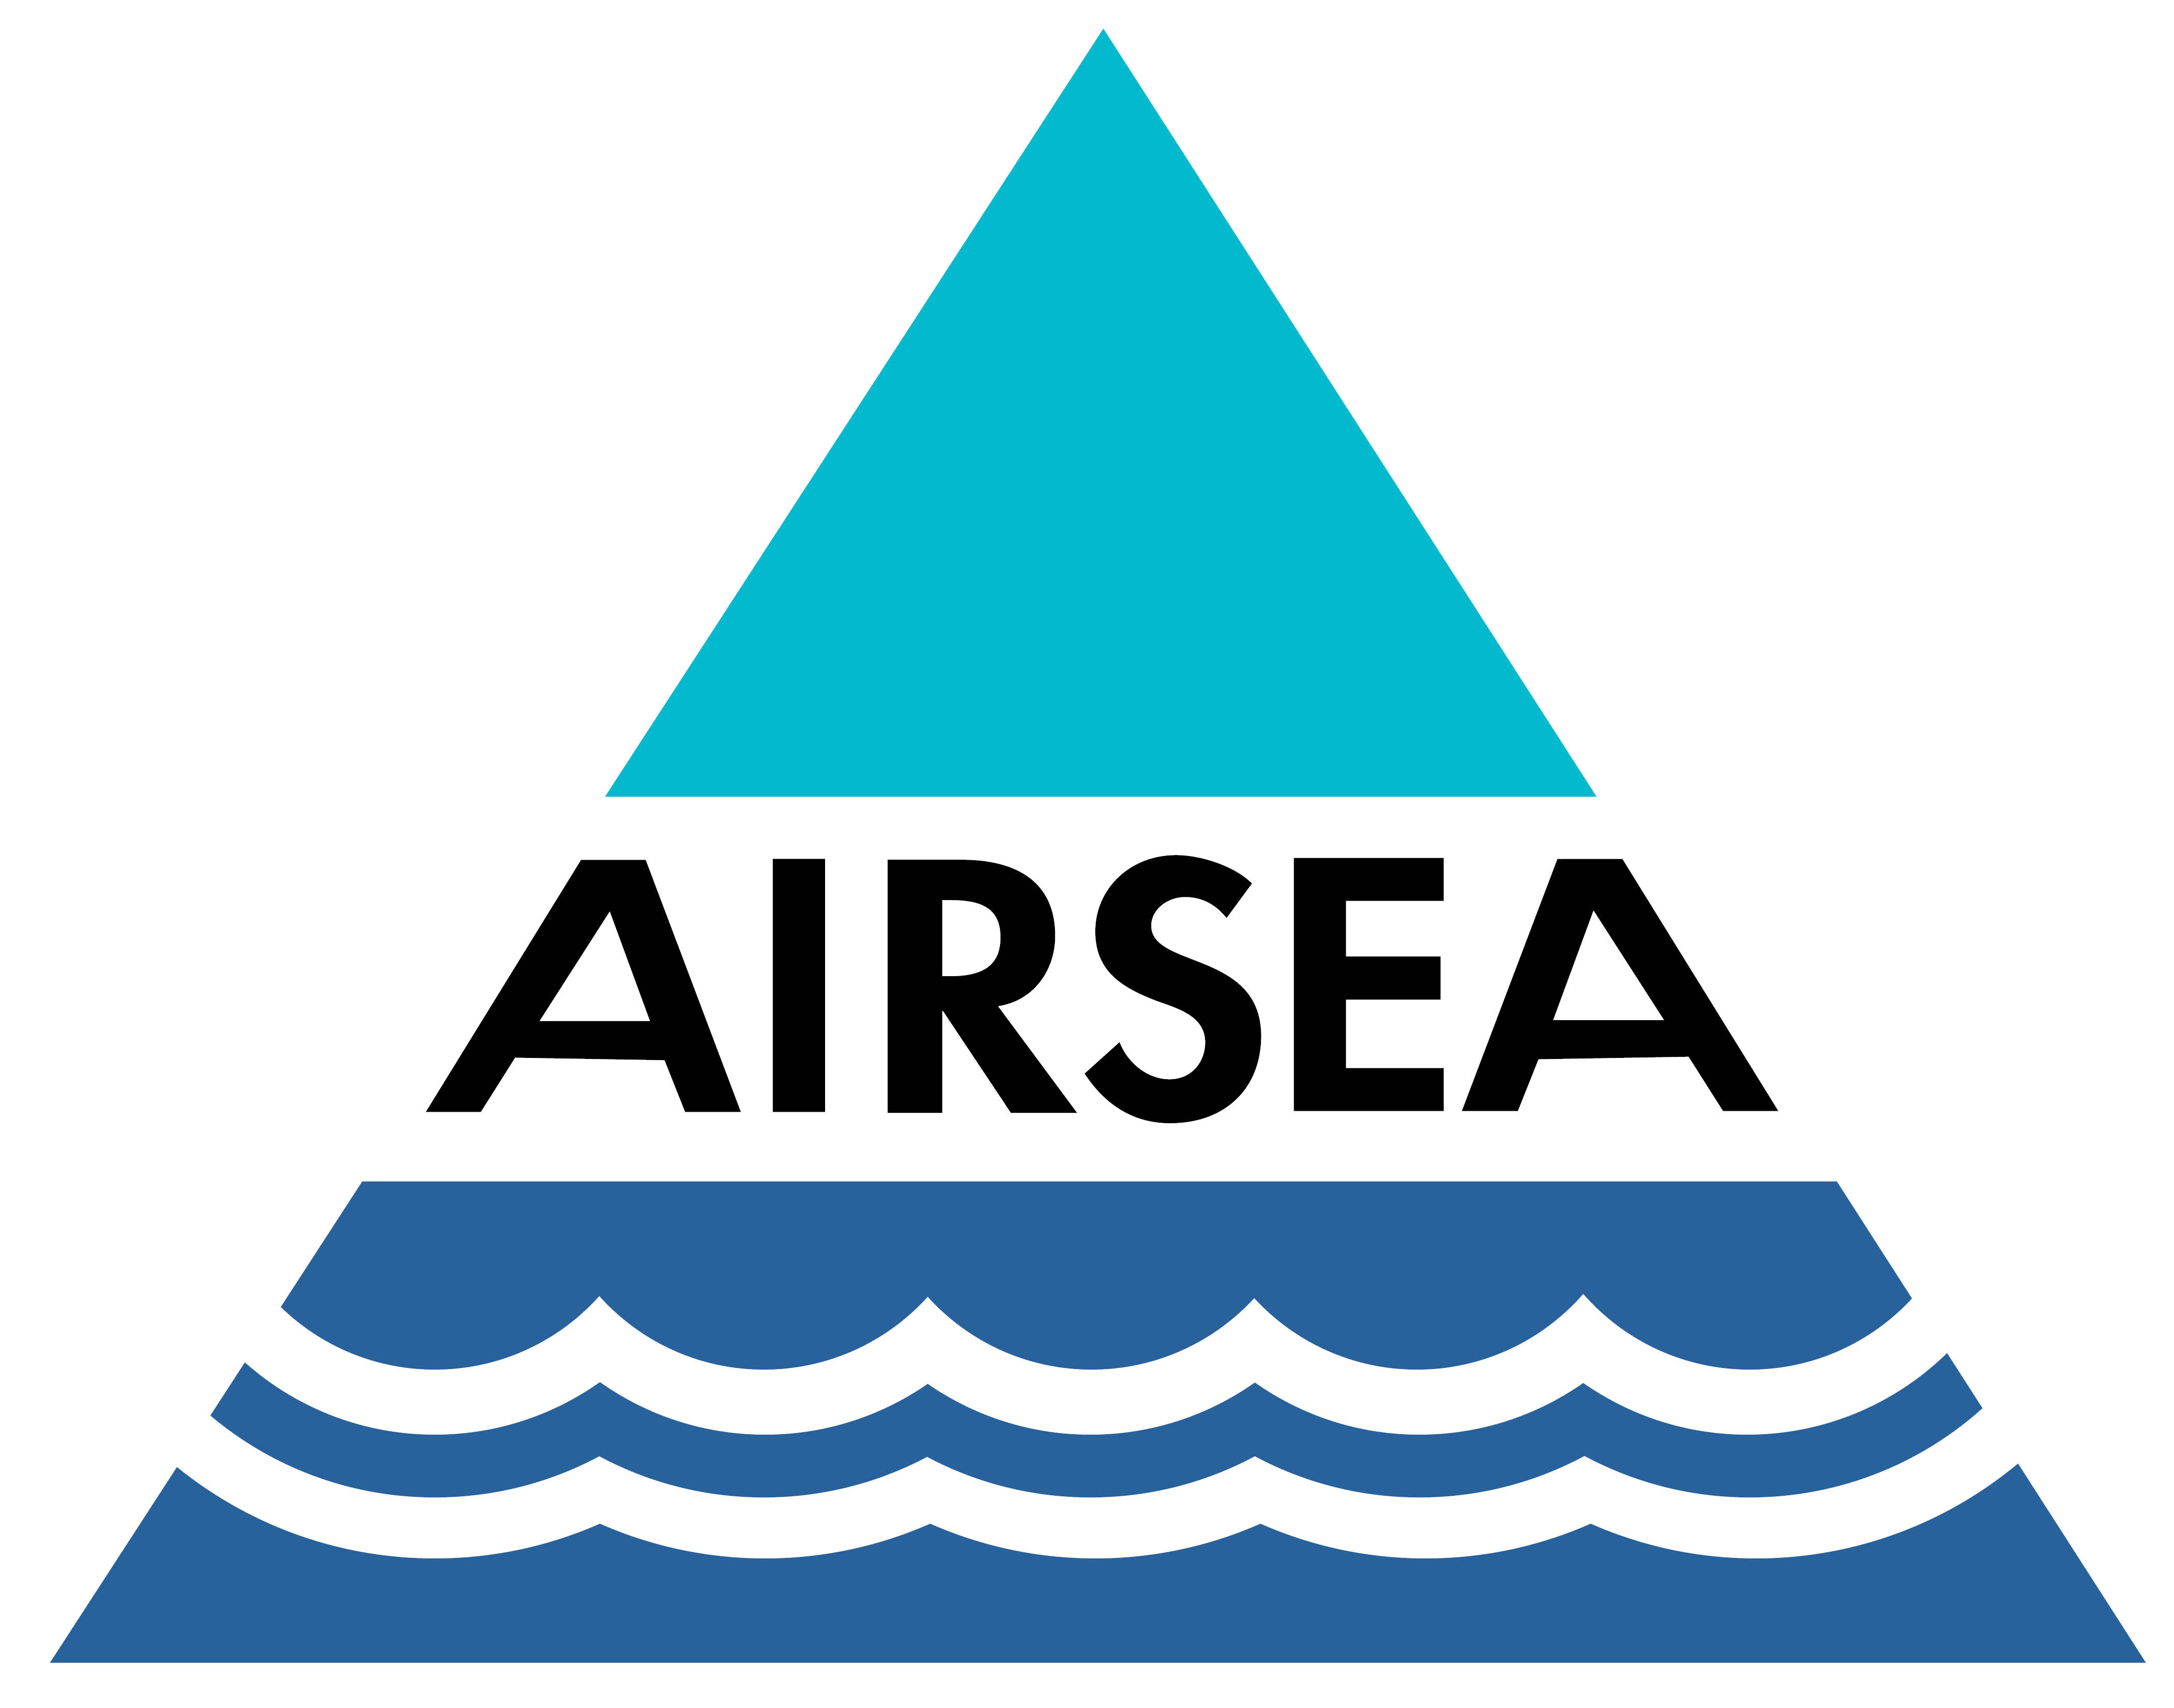 Air Sea Containers Ltd